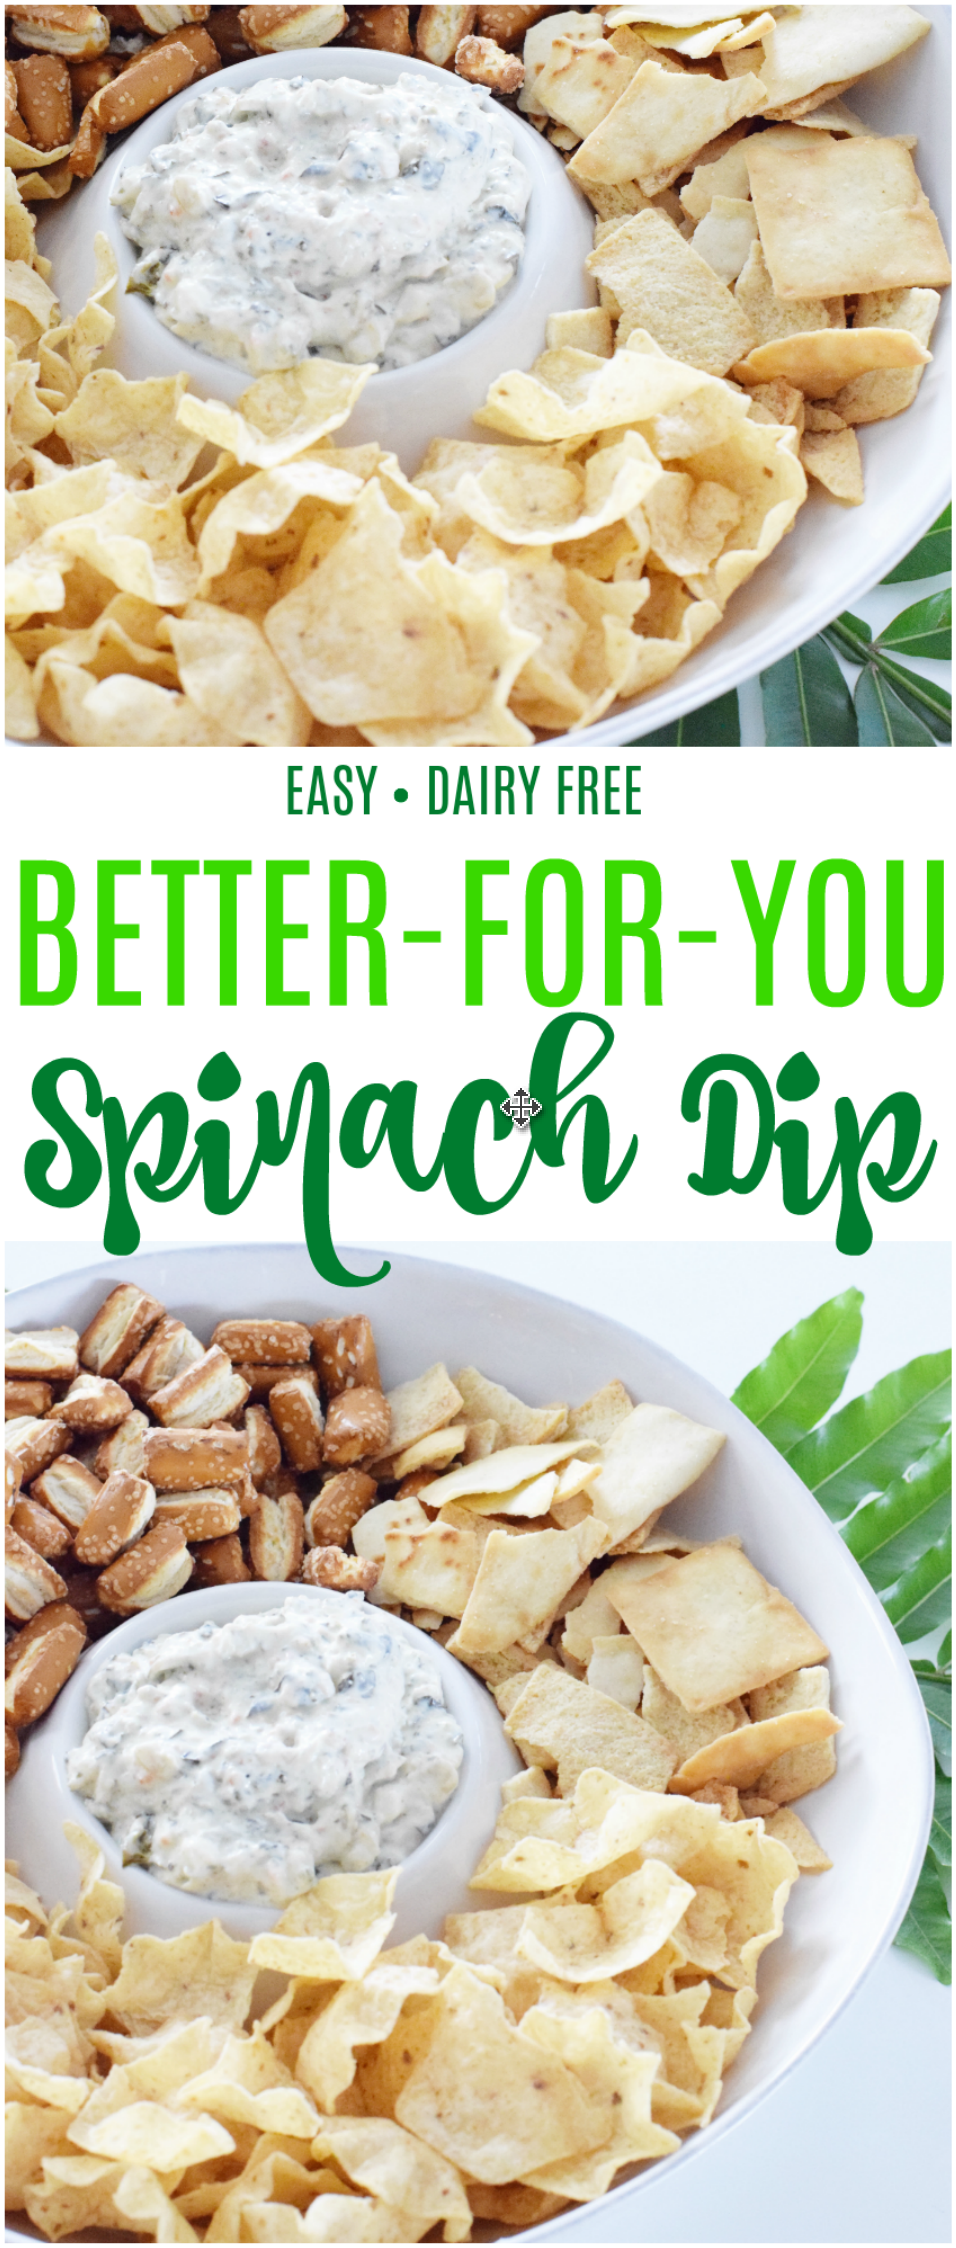 Best Ever Better-For-You Spinach Dip - an easy appetizer recipe that is gluten and dairy free, pleases a large crowd and can be served all year long! - Easy Dip Recipe - Dairy Free Appetizer - Gluten Free Appetizer - Recipe Idea For Appetizer - Communikait